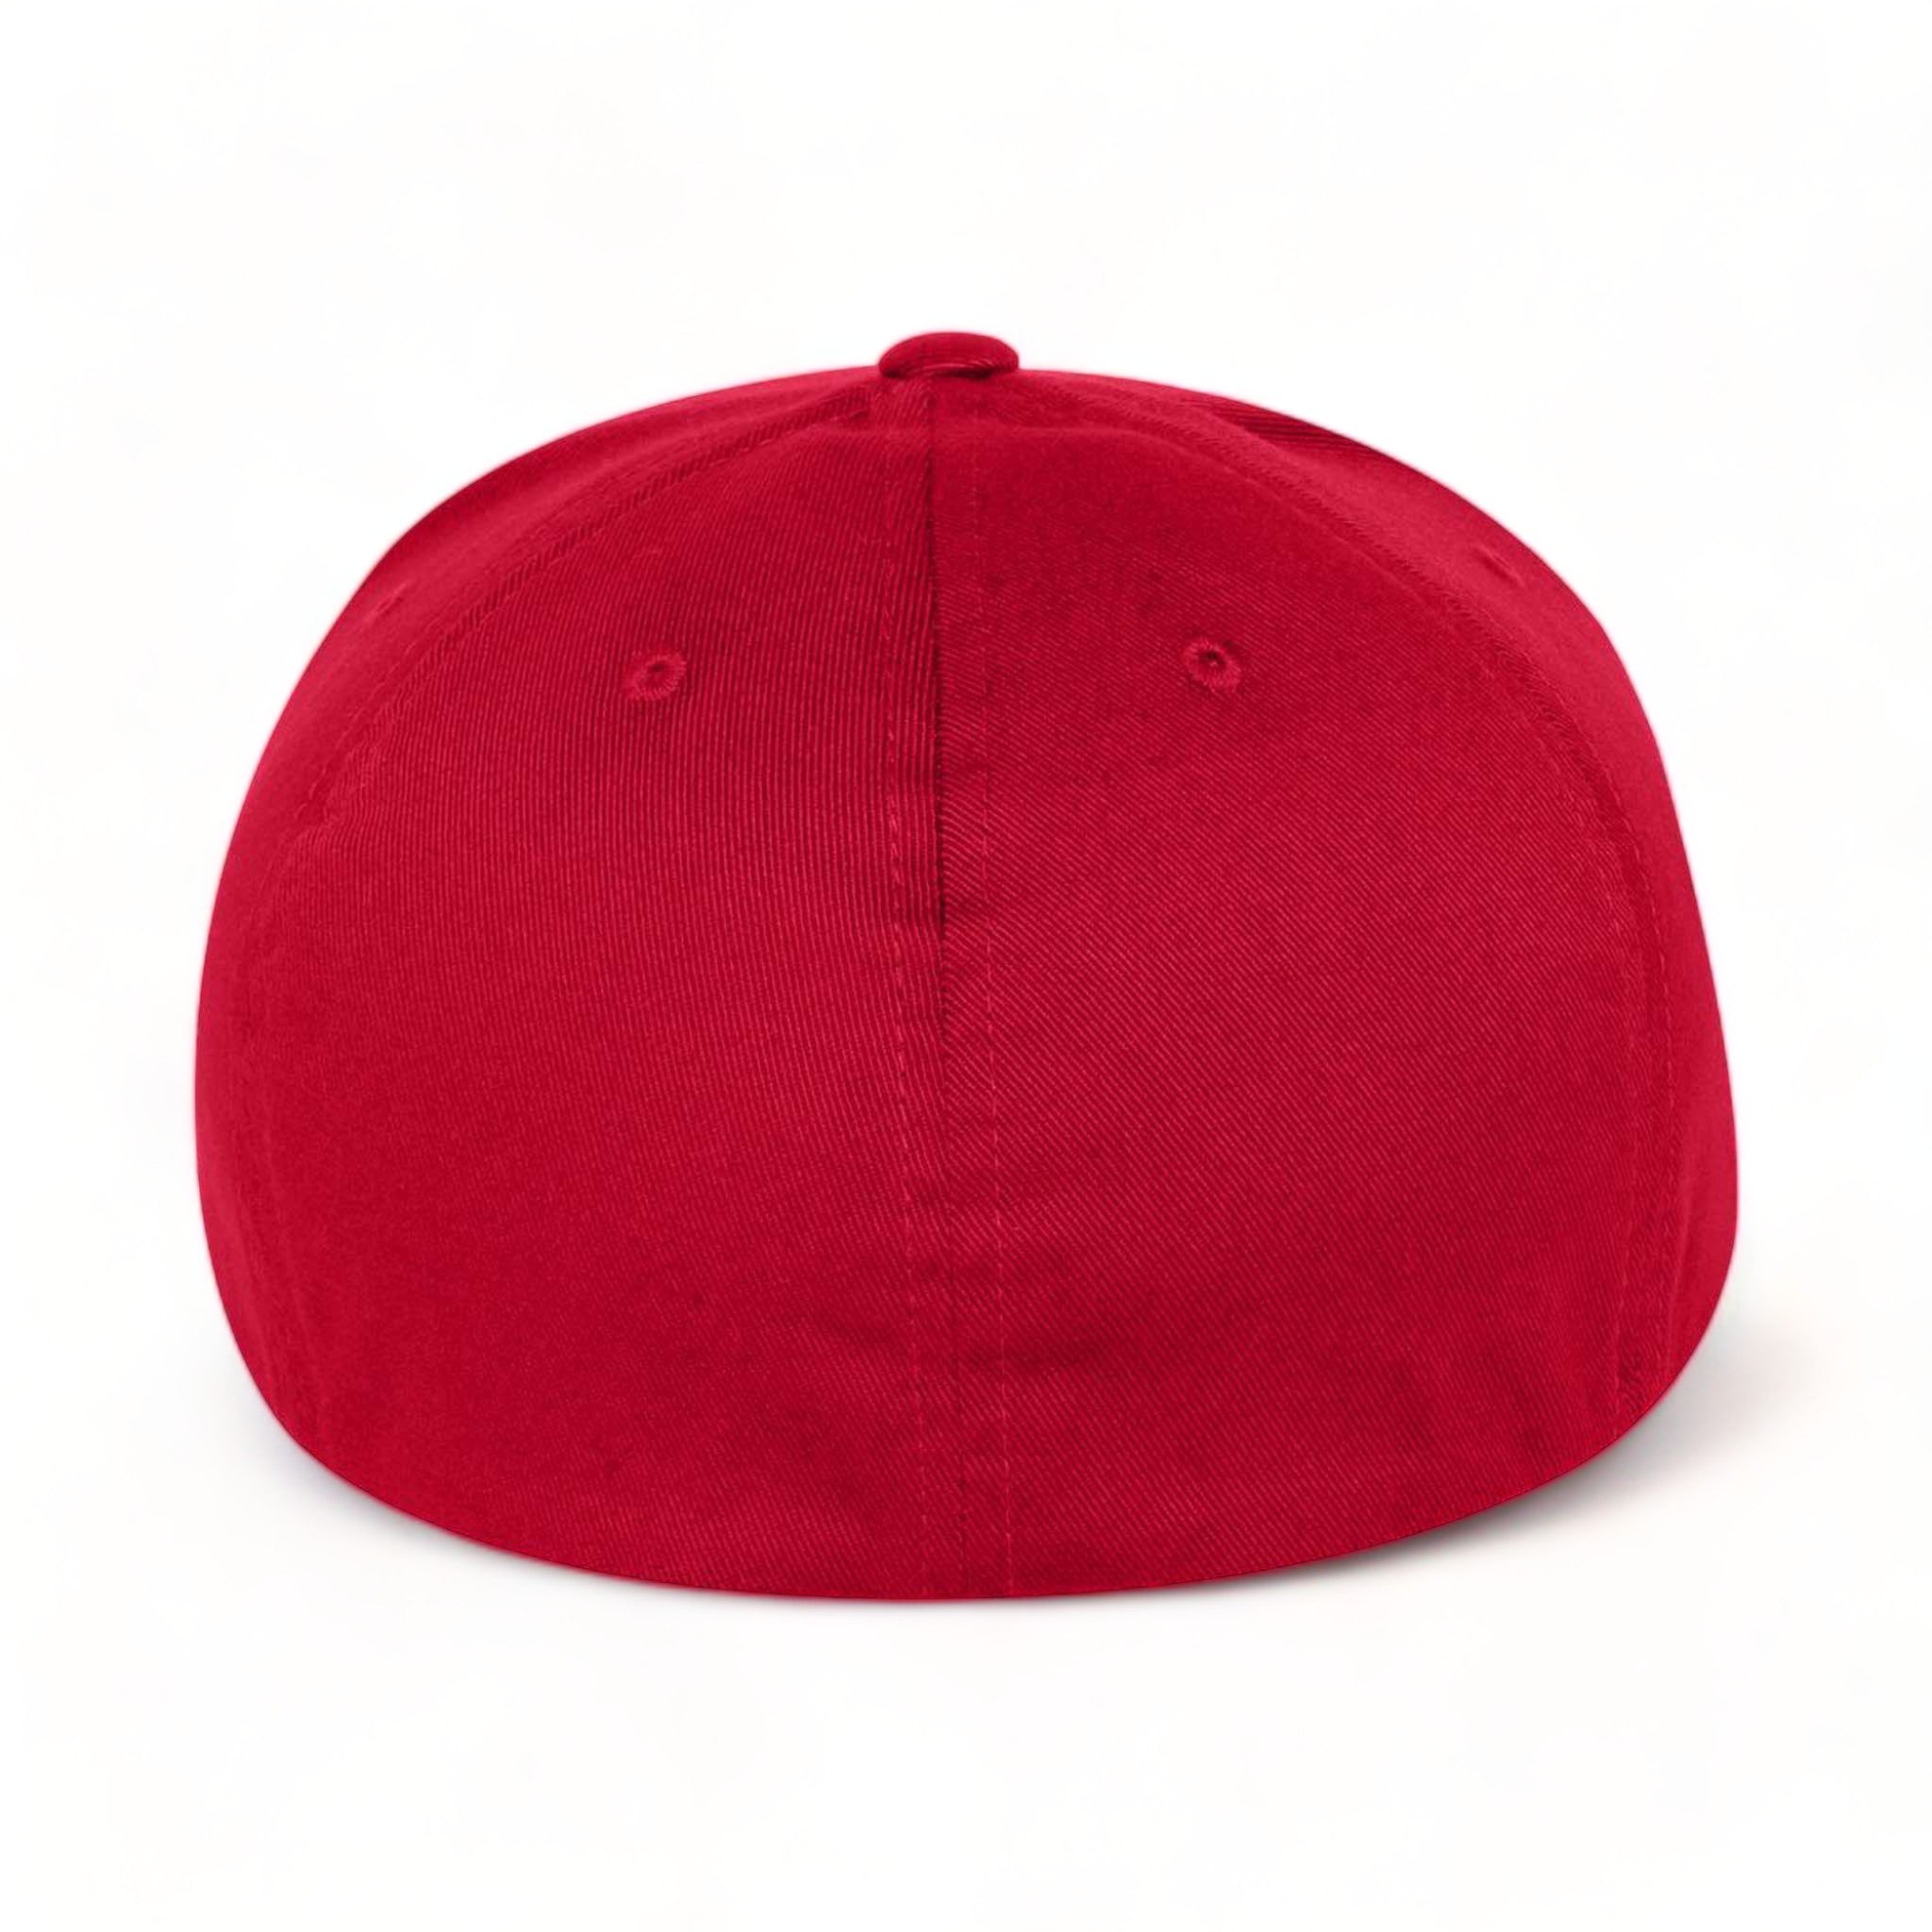 Back view of Flexfit 6297f custom hat in red